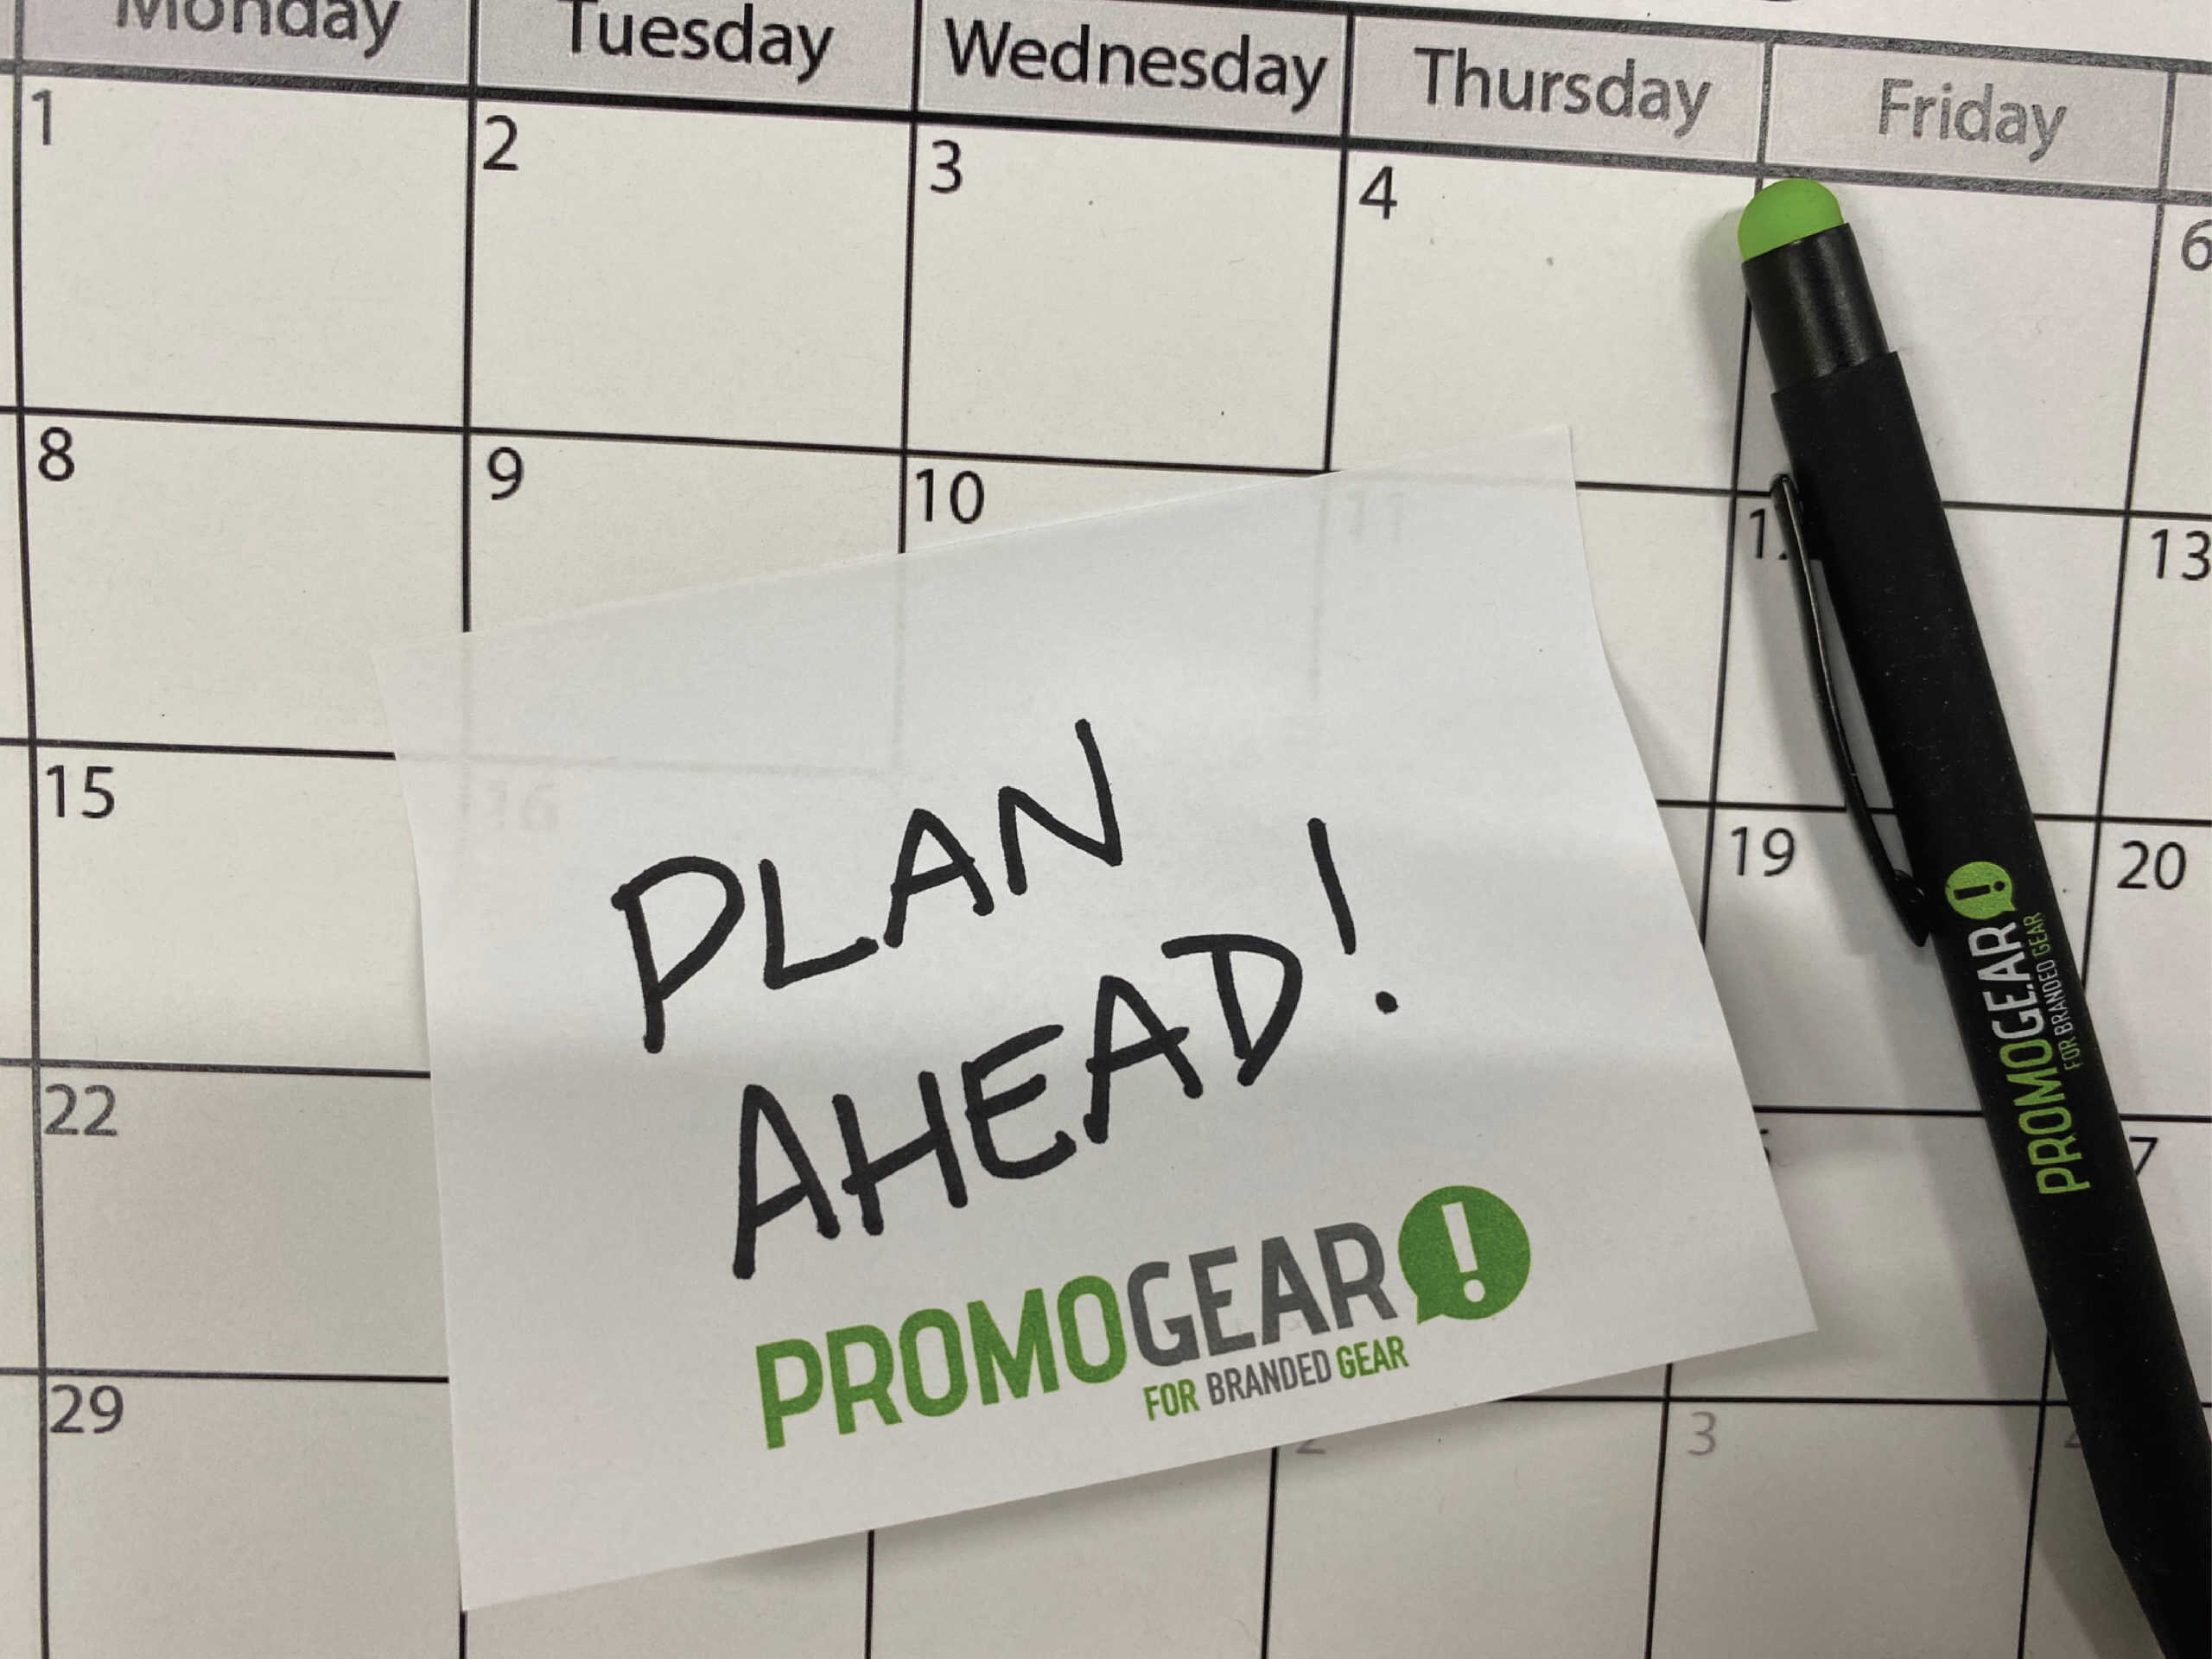 Start planning ahead now! Promo Gear branded sticky note and pen on a calendar